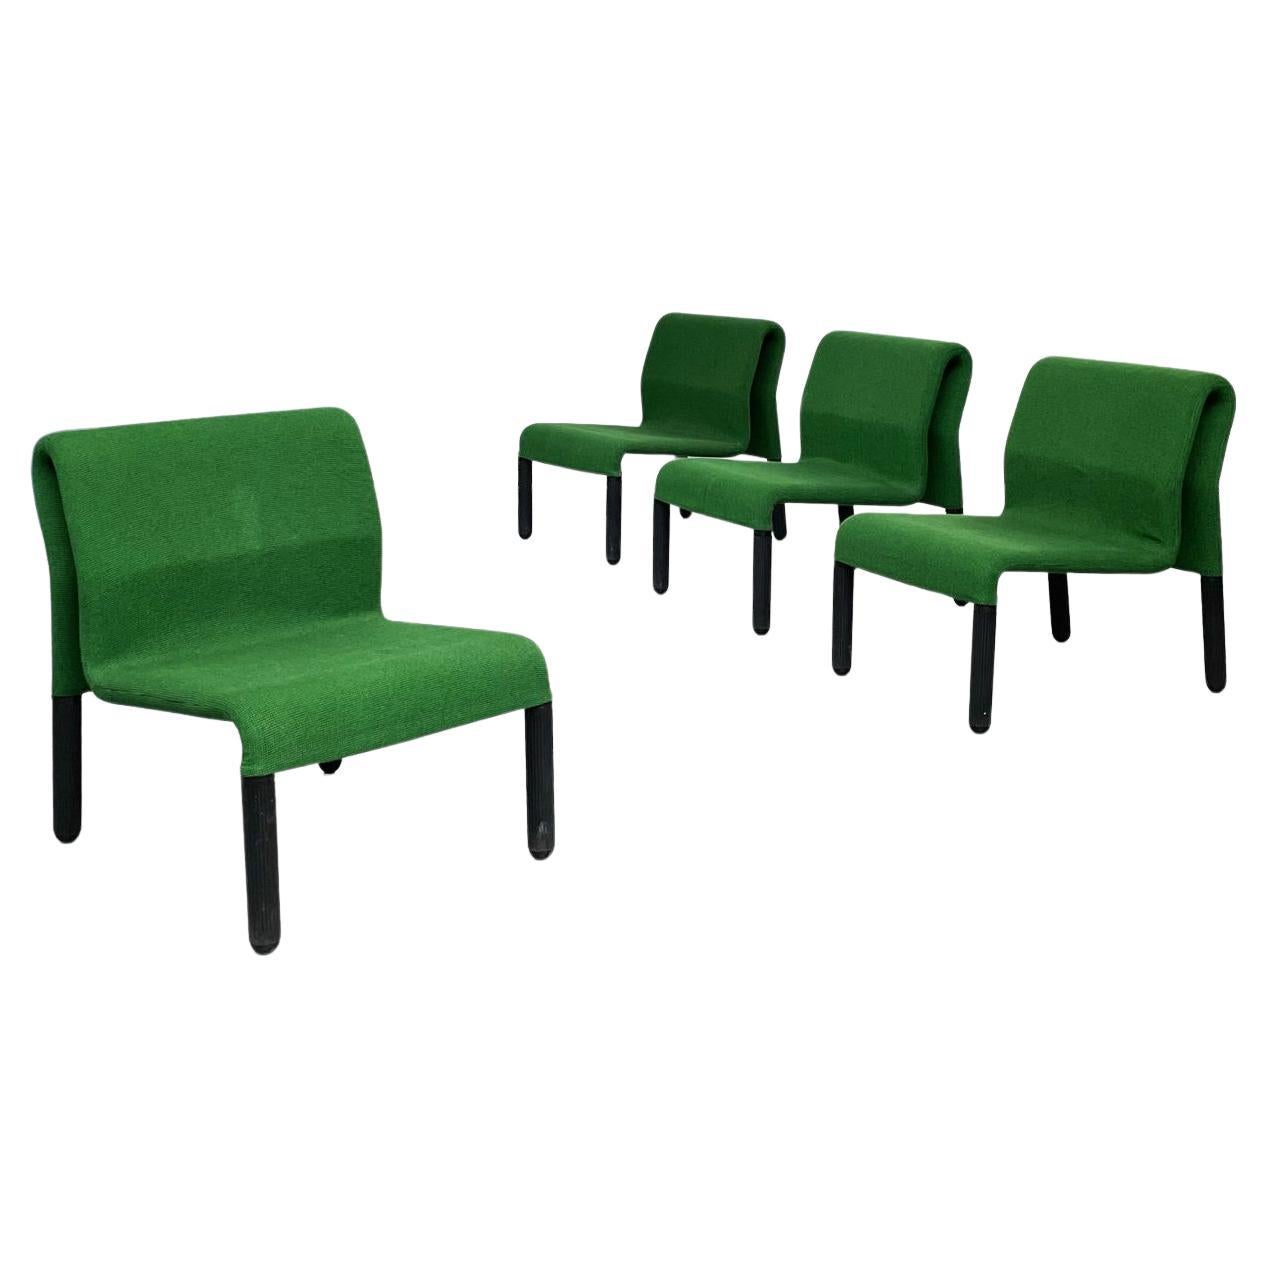 Italian Space Age Armchairs in Green Fabric and Black Plastic, 1970s